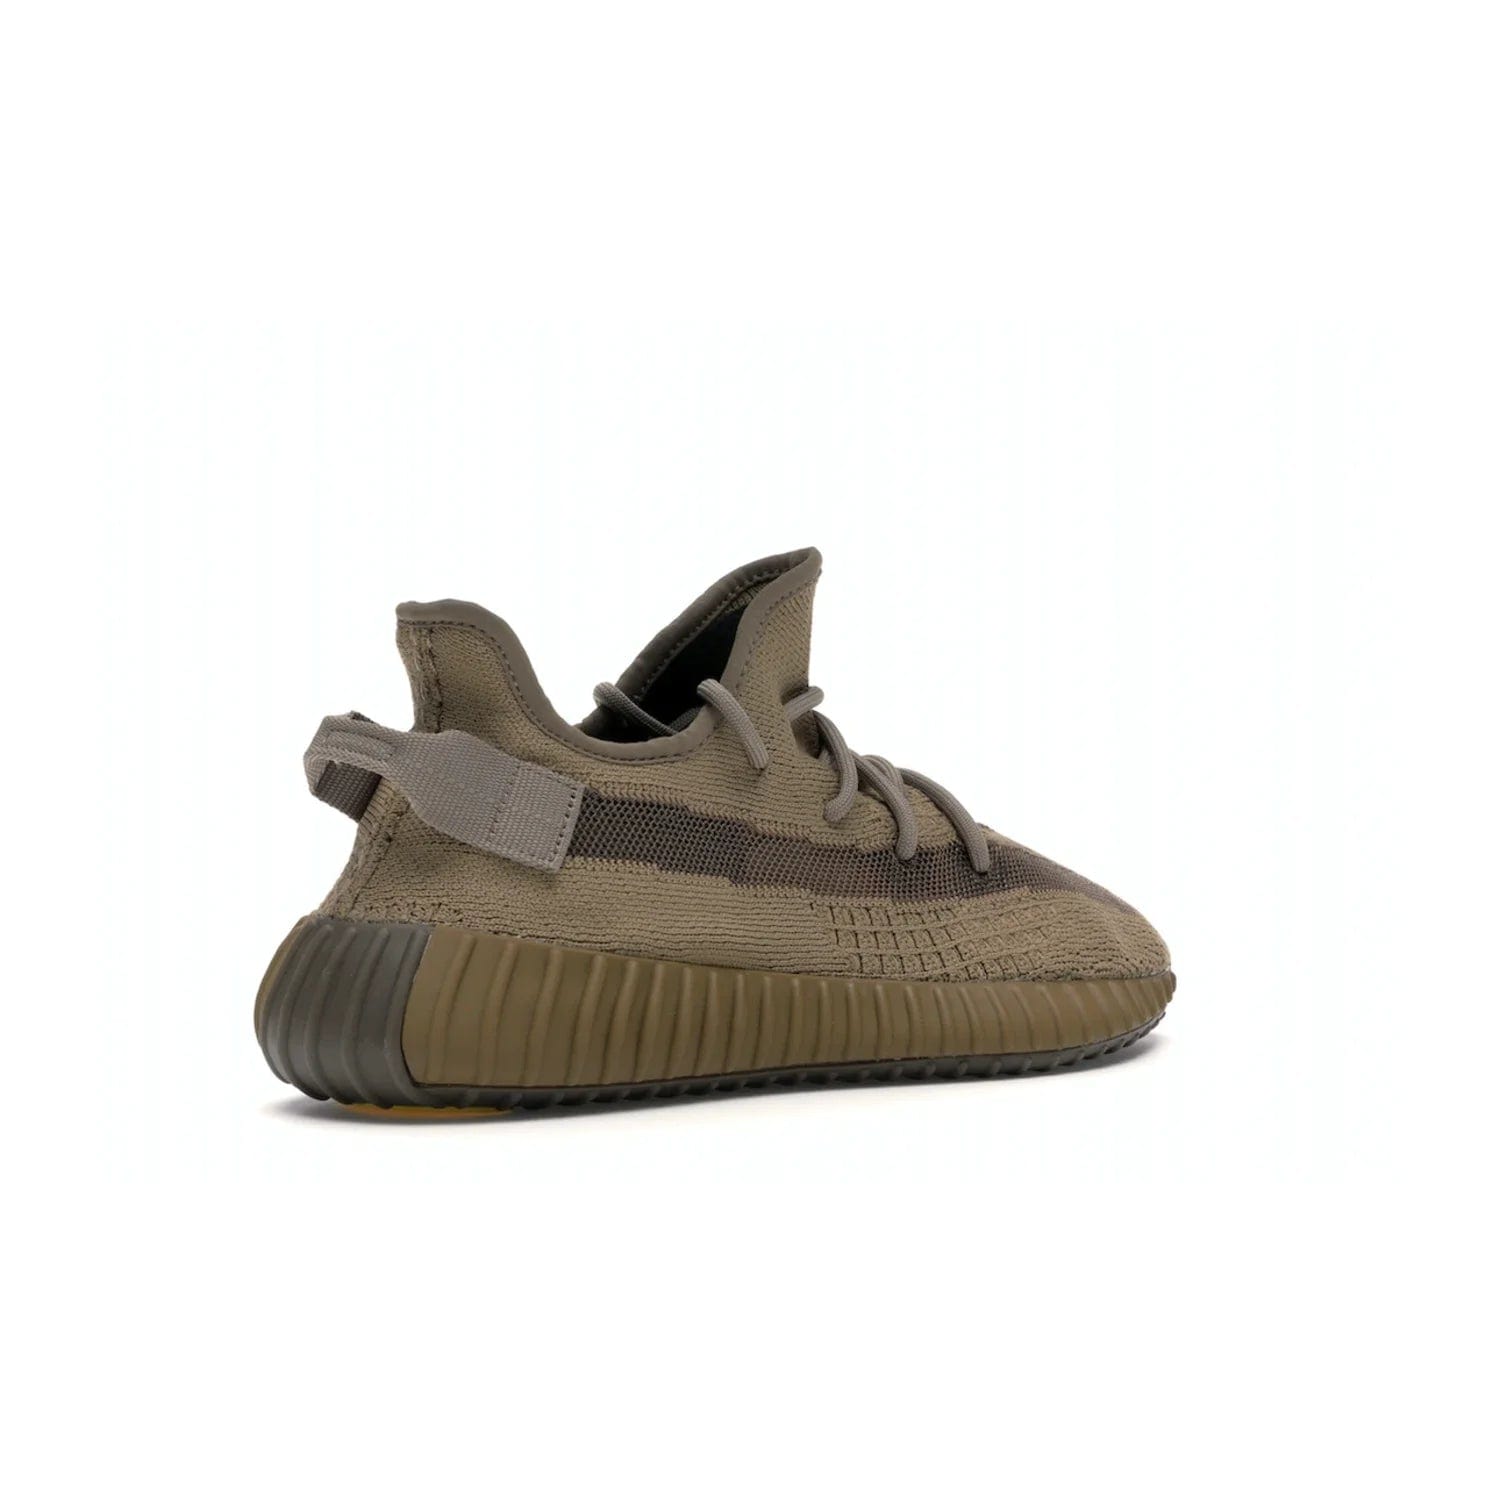 adidas Yeezy Boost 350 V2 Earth - Image 33 - Only at www.BallersClubKickz.com - Abstract style with the adidas Yeezy Boost 350 V2 Earth. Crafted with mud Primeknit upper, mud Boost and interior, and a translucent side stripe. Regional exclusive in Earth/Earth/Earth colorway, these fashionable sneakers released in February 2020. Showcase your style with the Yeezy 350 V2 Earth.